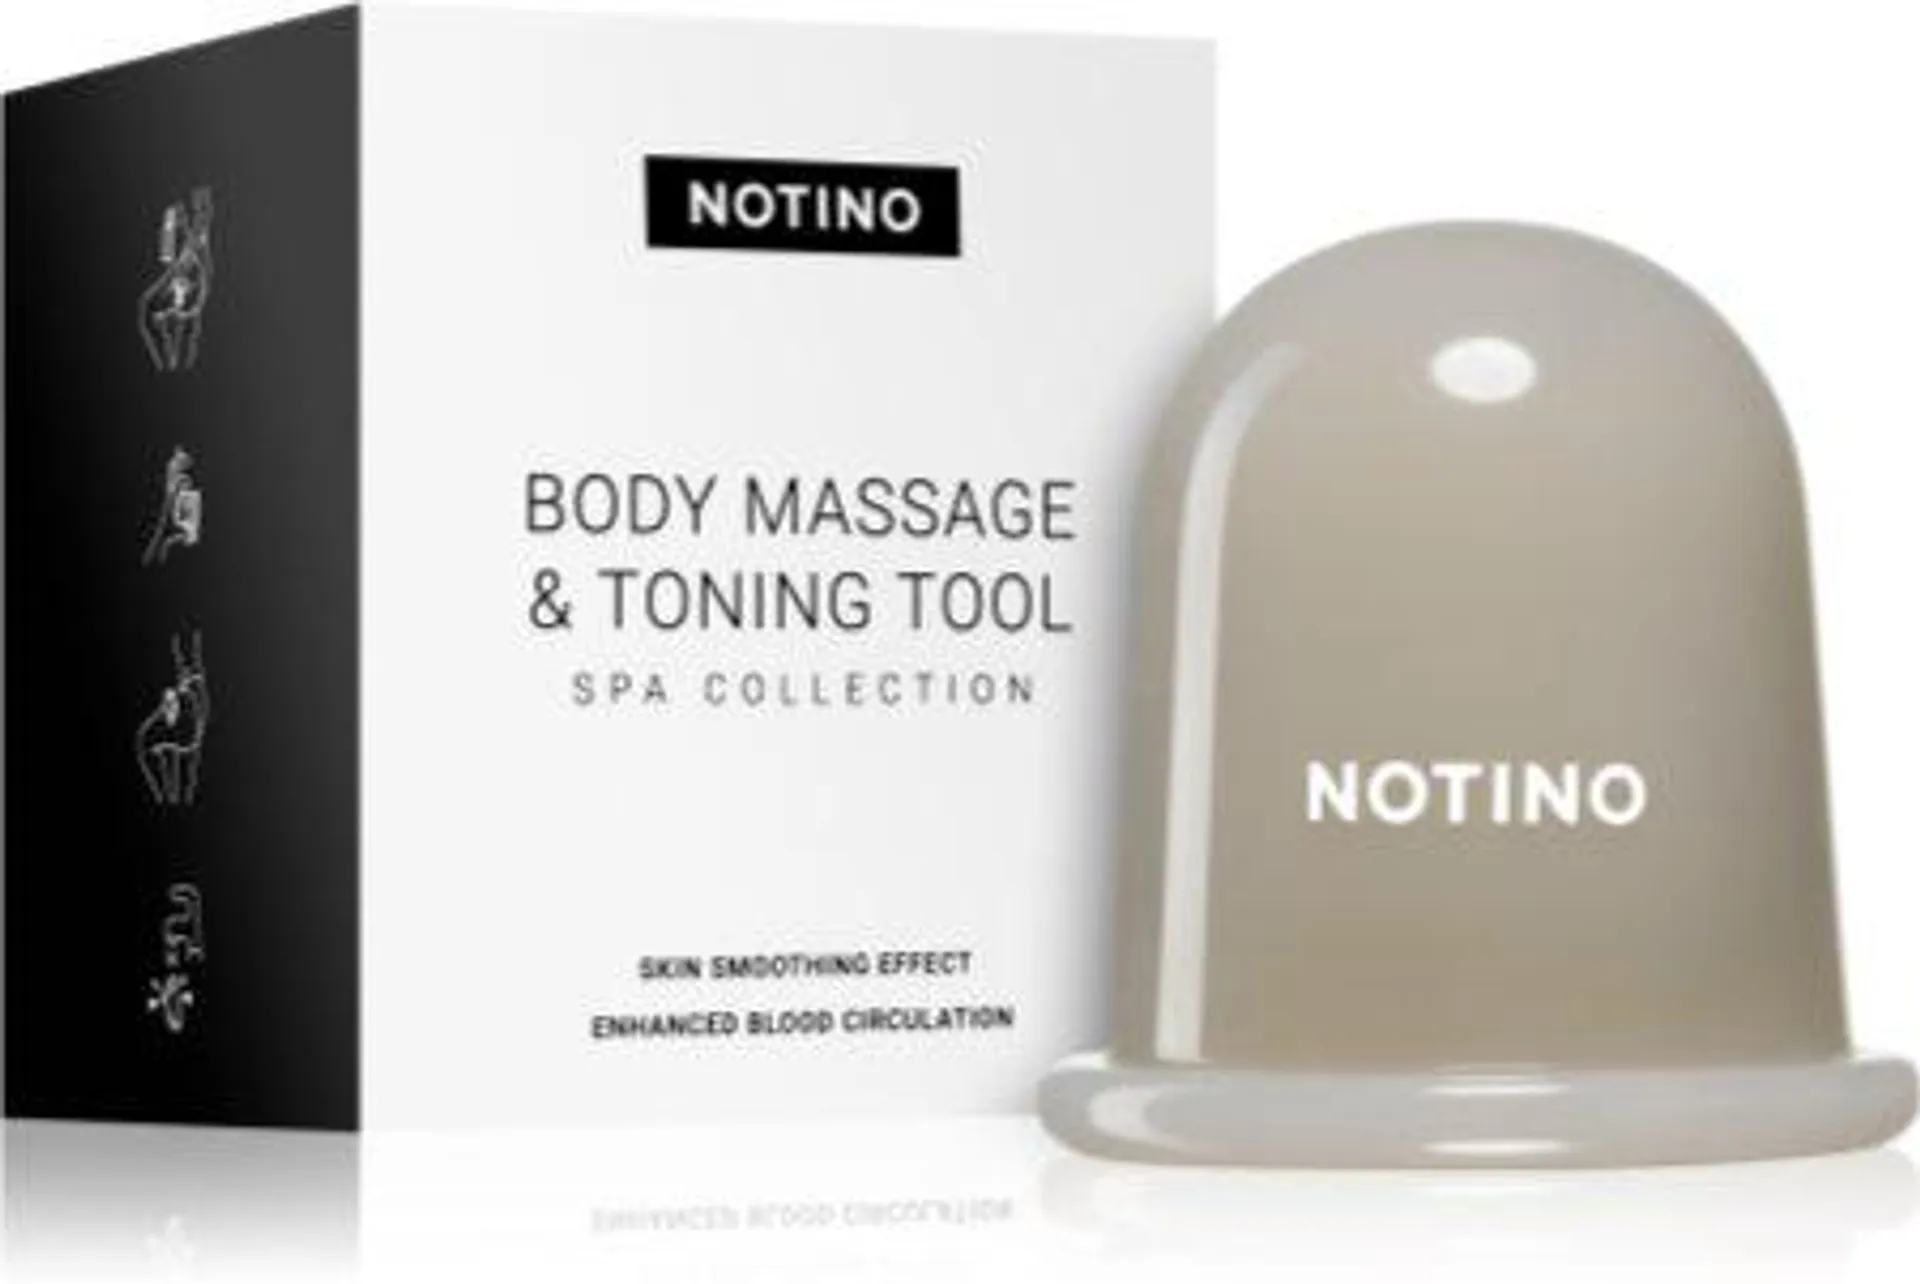 Spa Collection Body massage & Toning tool